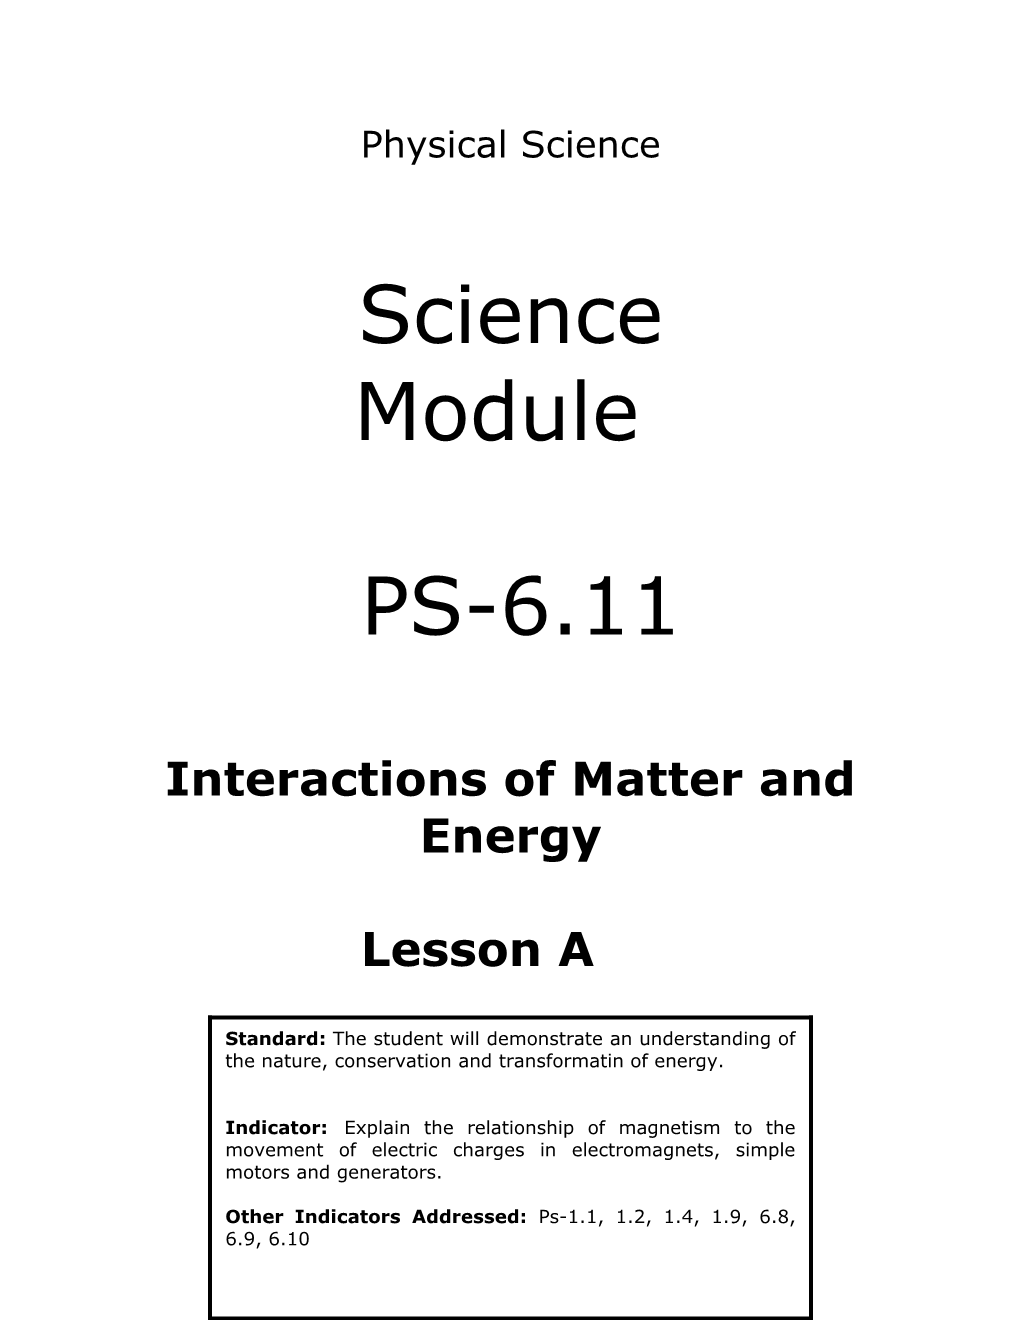 Interactions of Matter and Energy